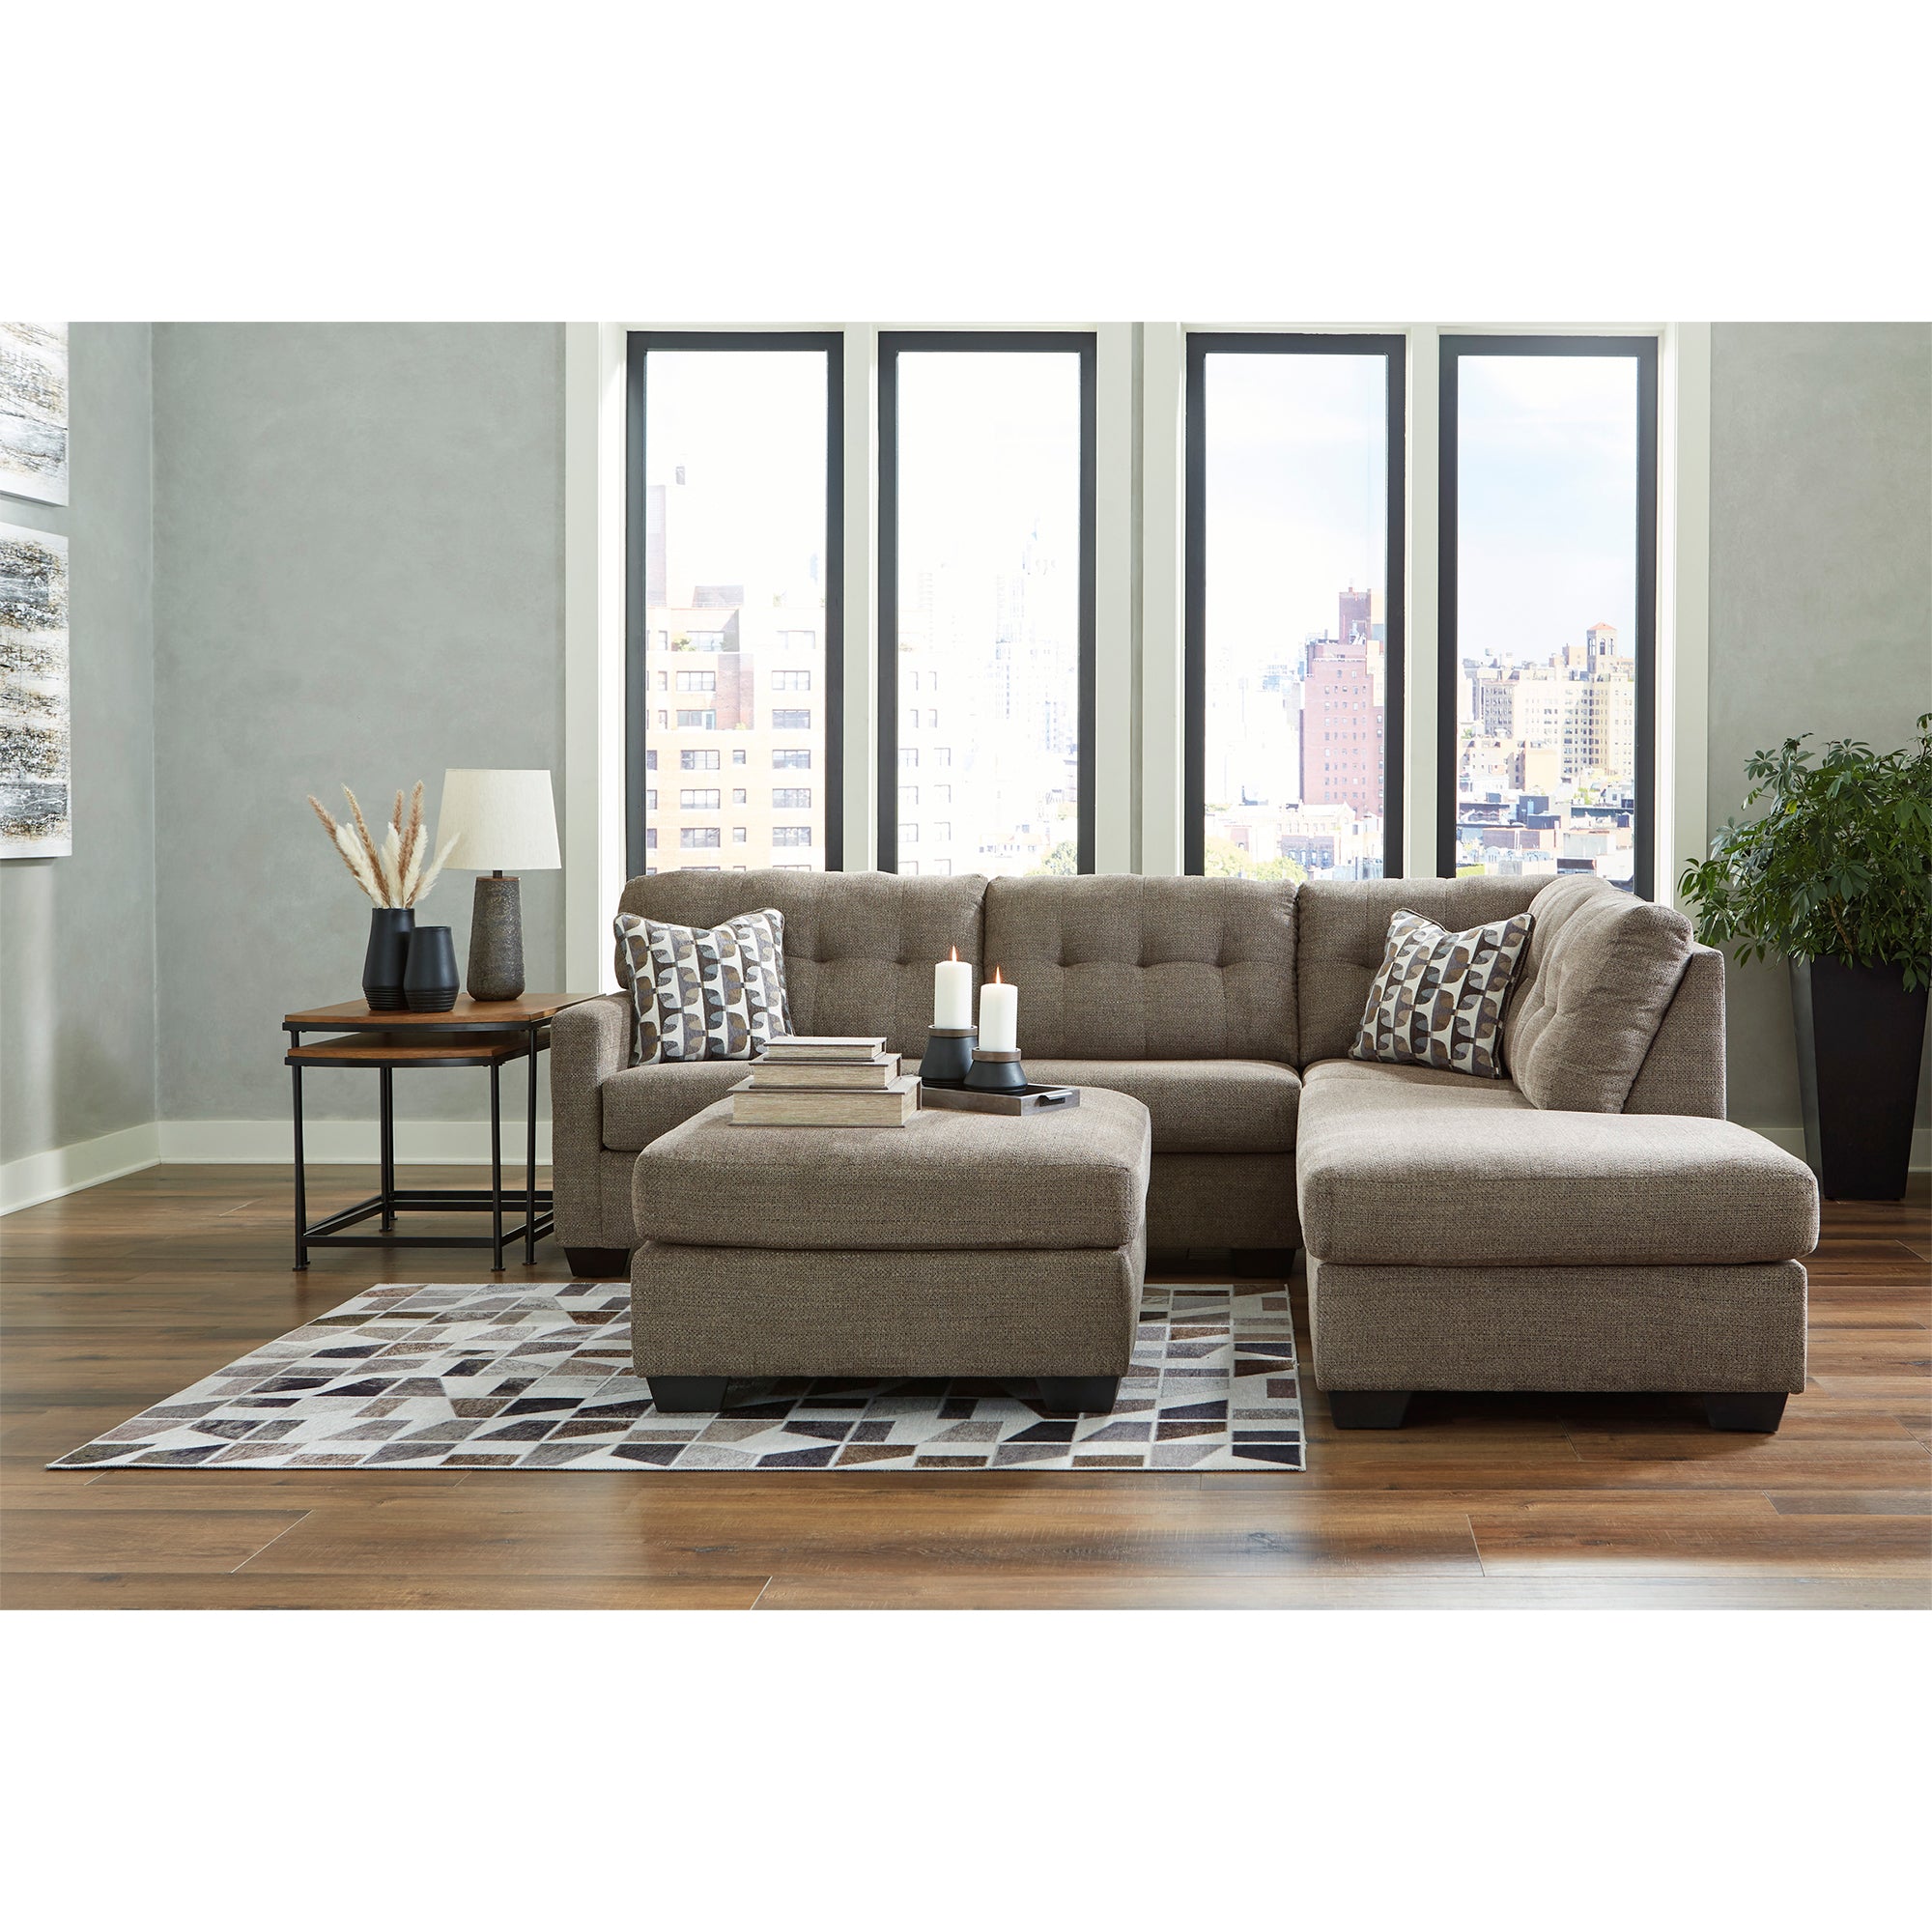 Plush and comfortable Mahoney 2-Piece Sectional in deep chocolate, designed for relaxation